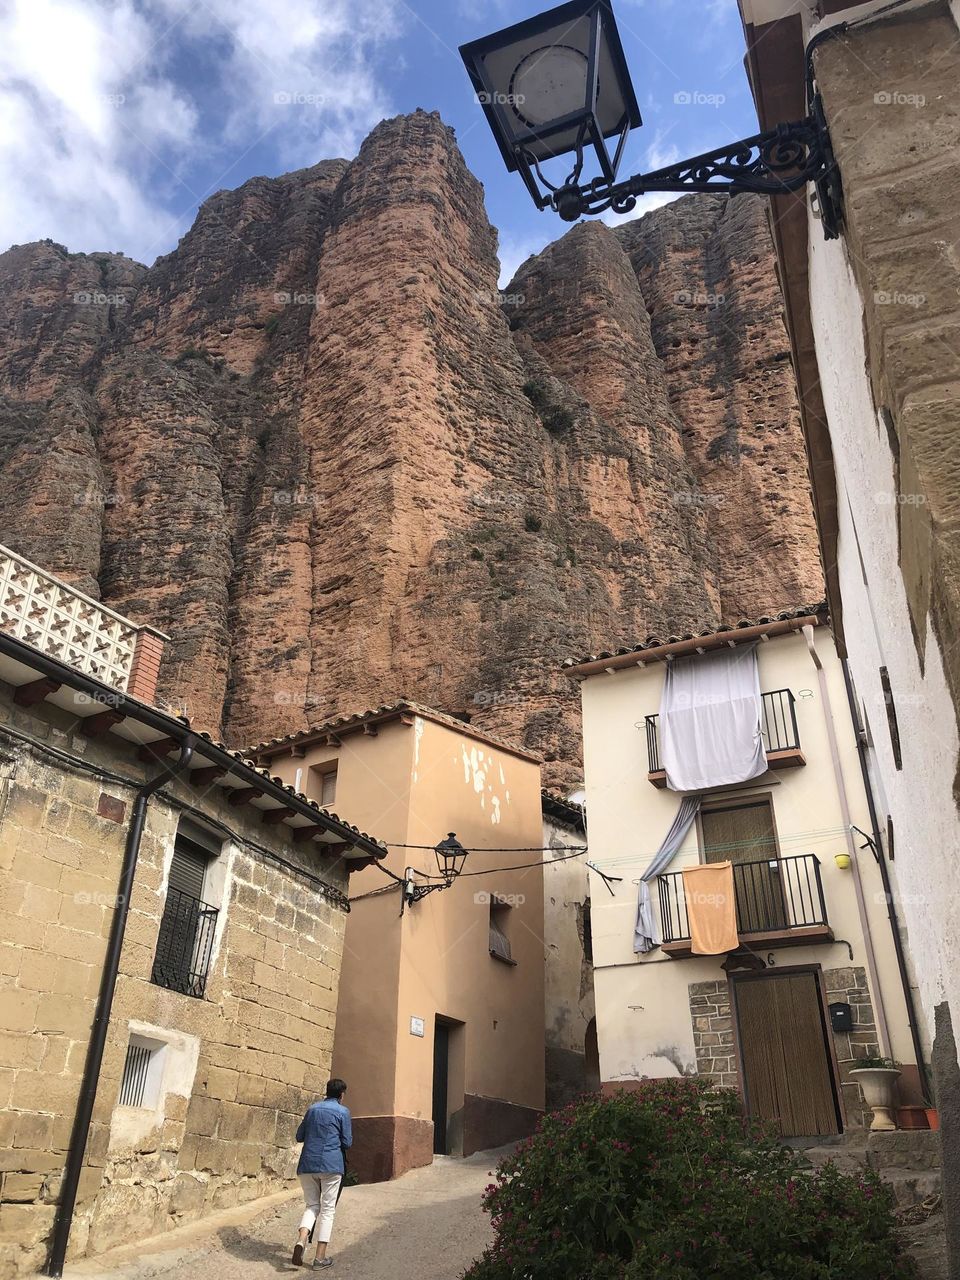 Old town at the foot of nice conglomerate rock forms 